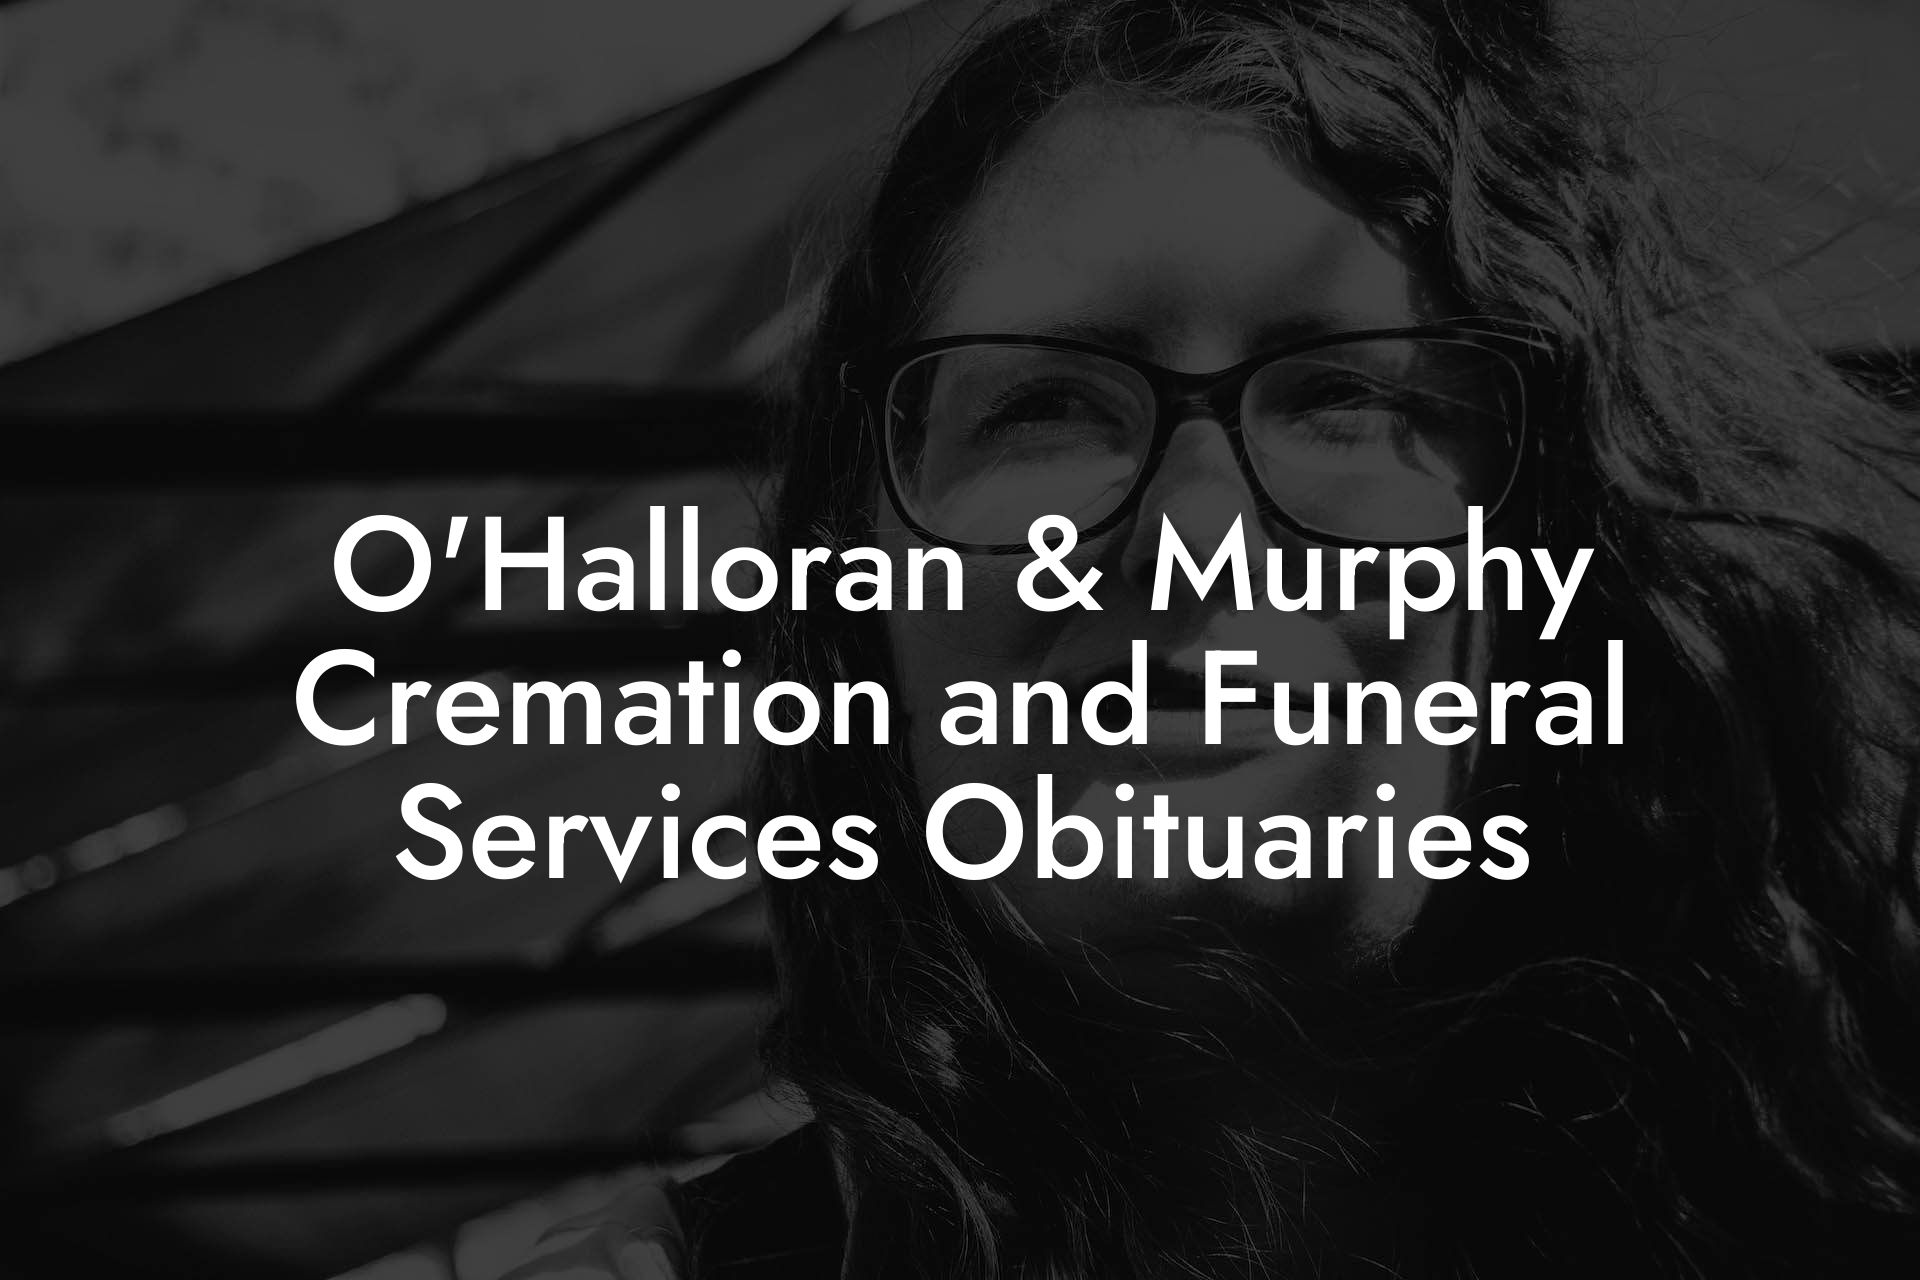 O'Halloran & Murphy Cremation and Funeral Services Obituaries